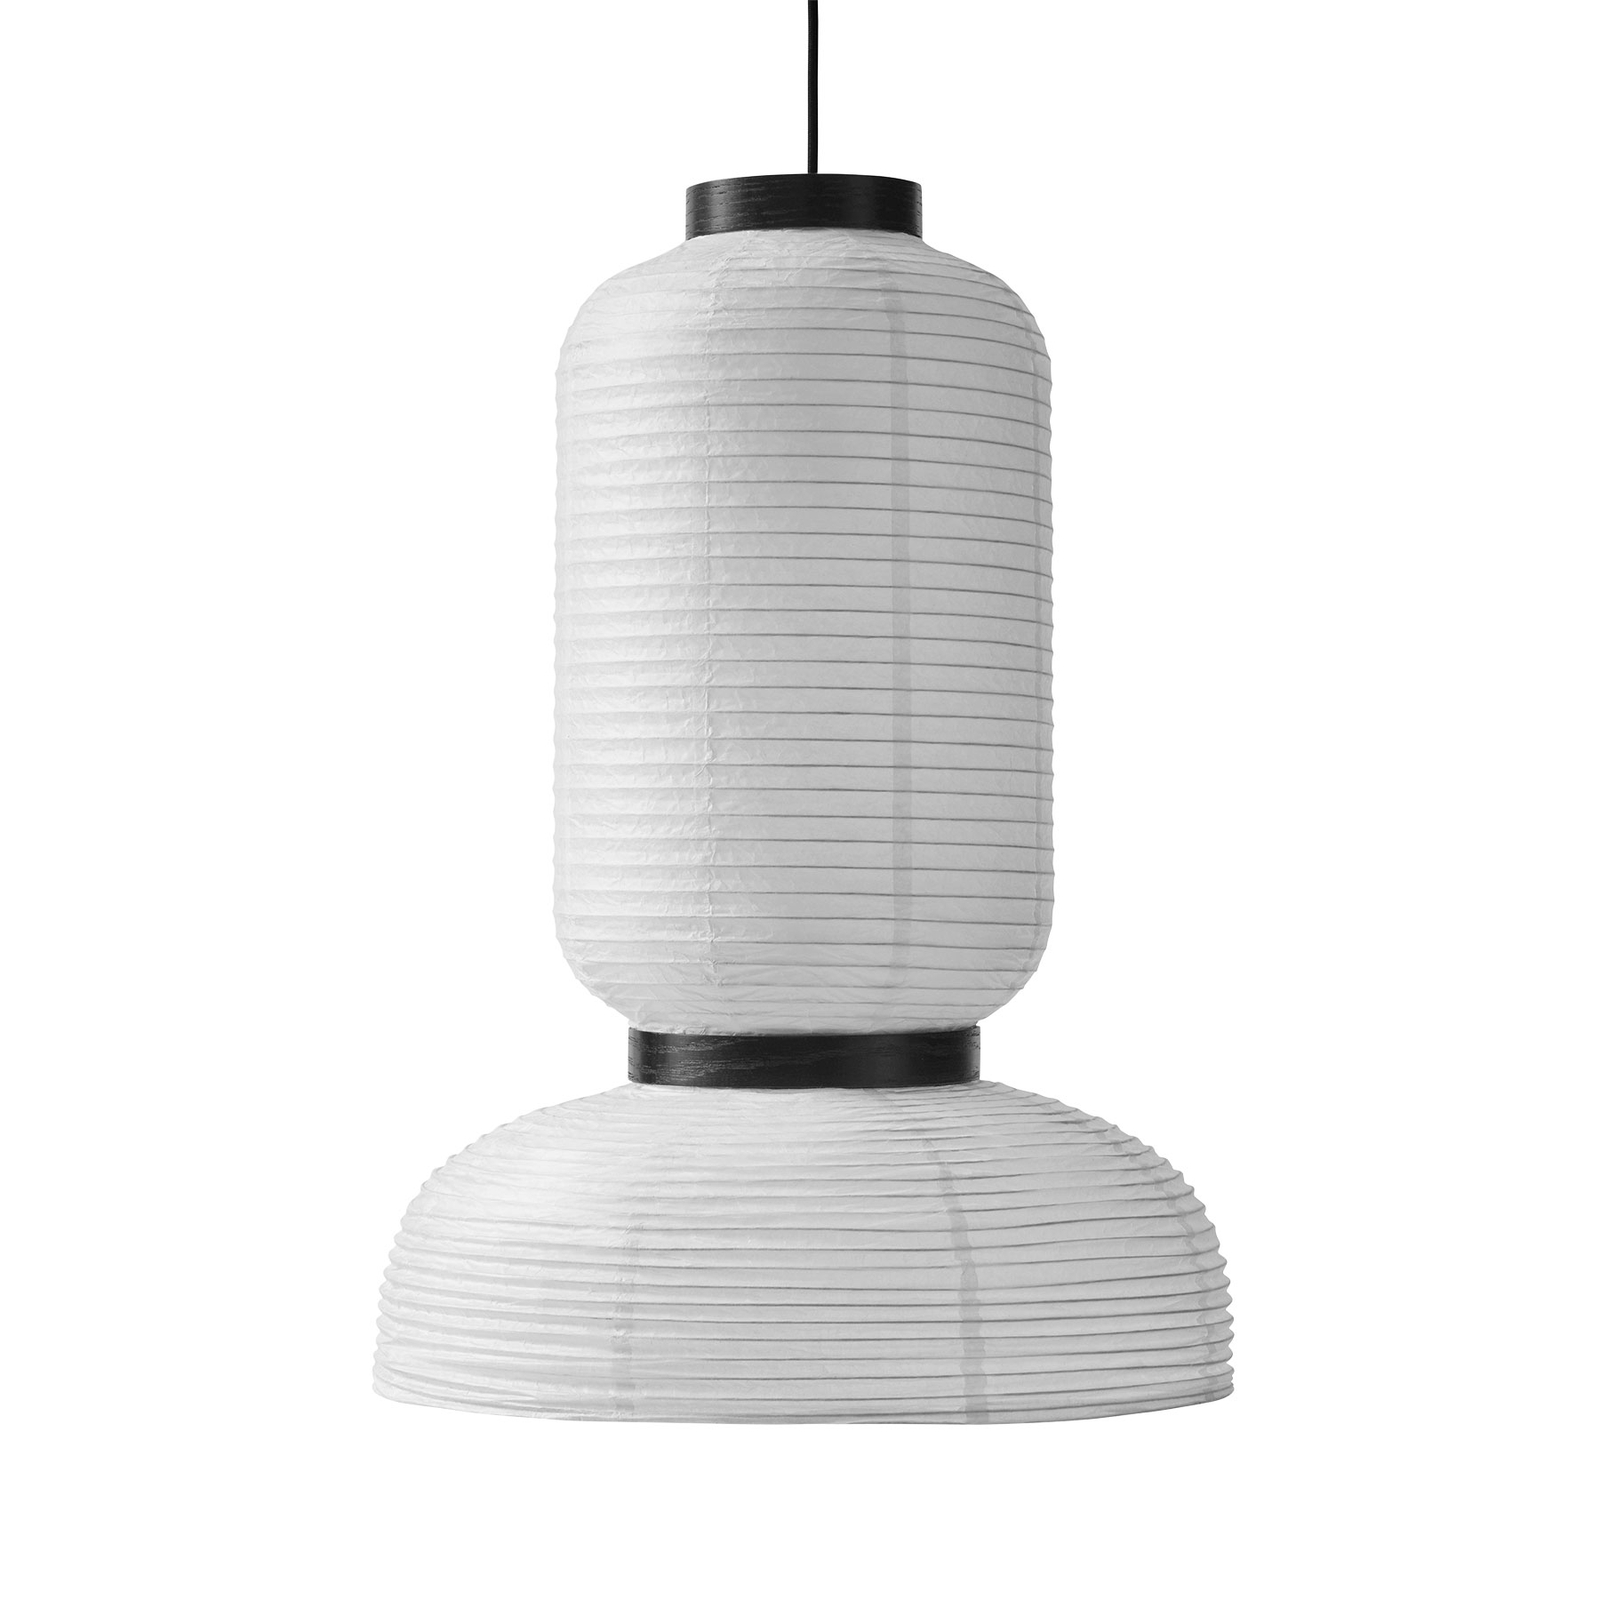 &Tradition Formakami JH3 pendant light